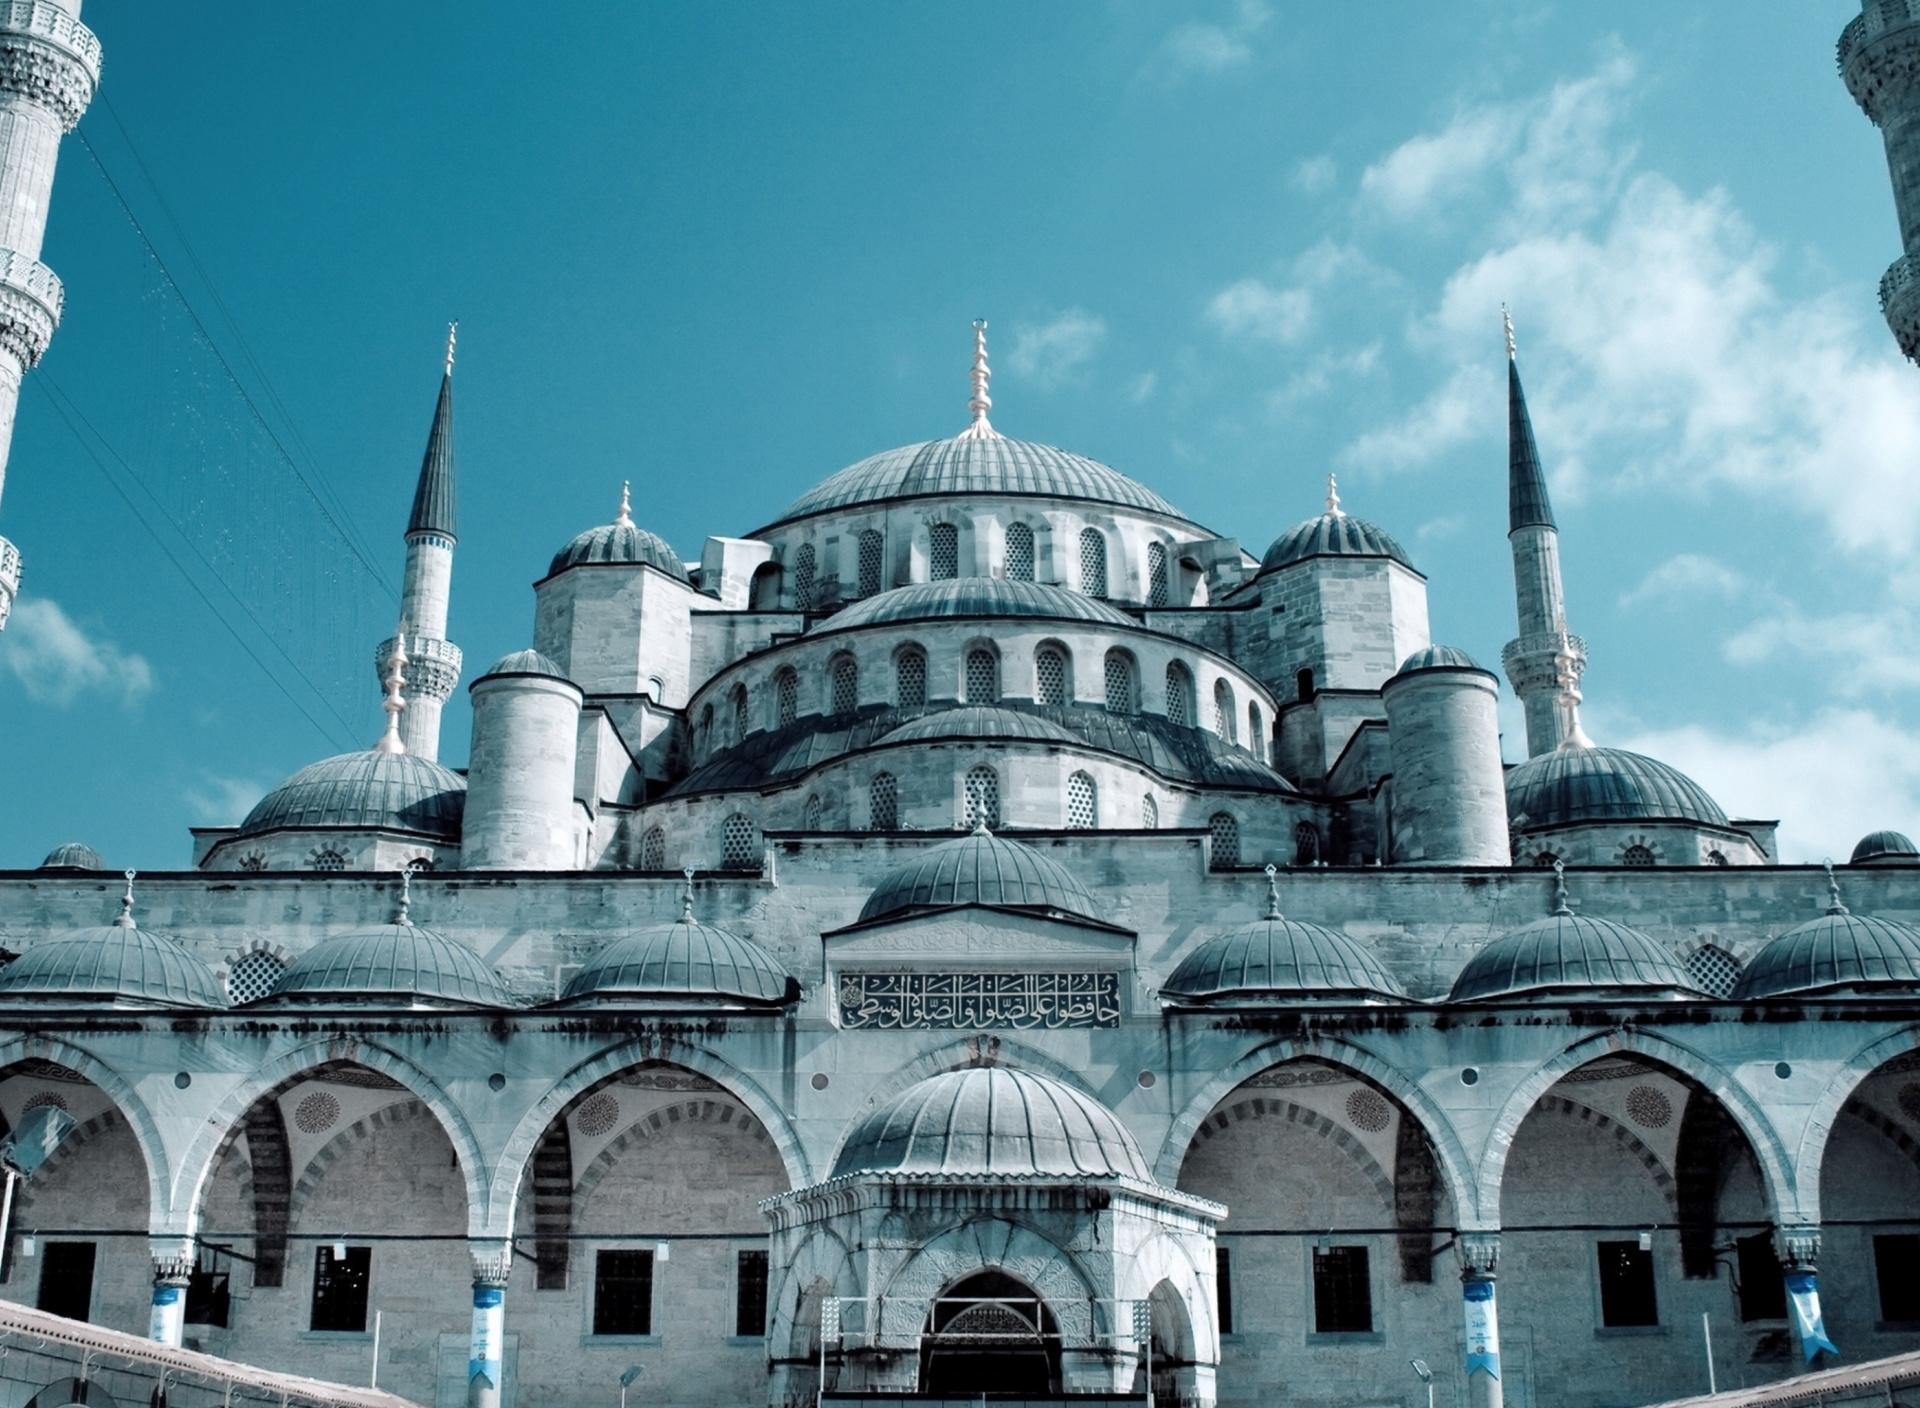 Sultan Ahmed Mosque in Istanbul screenshot #1 1920x1408